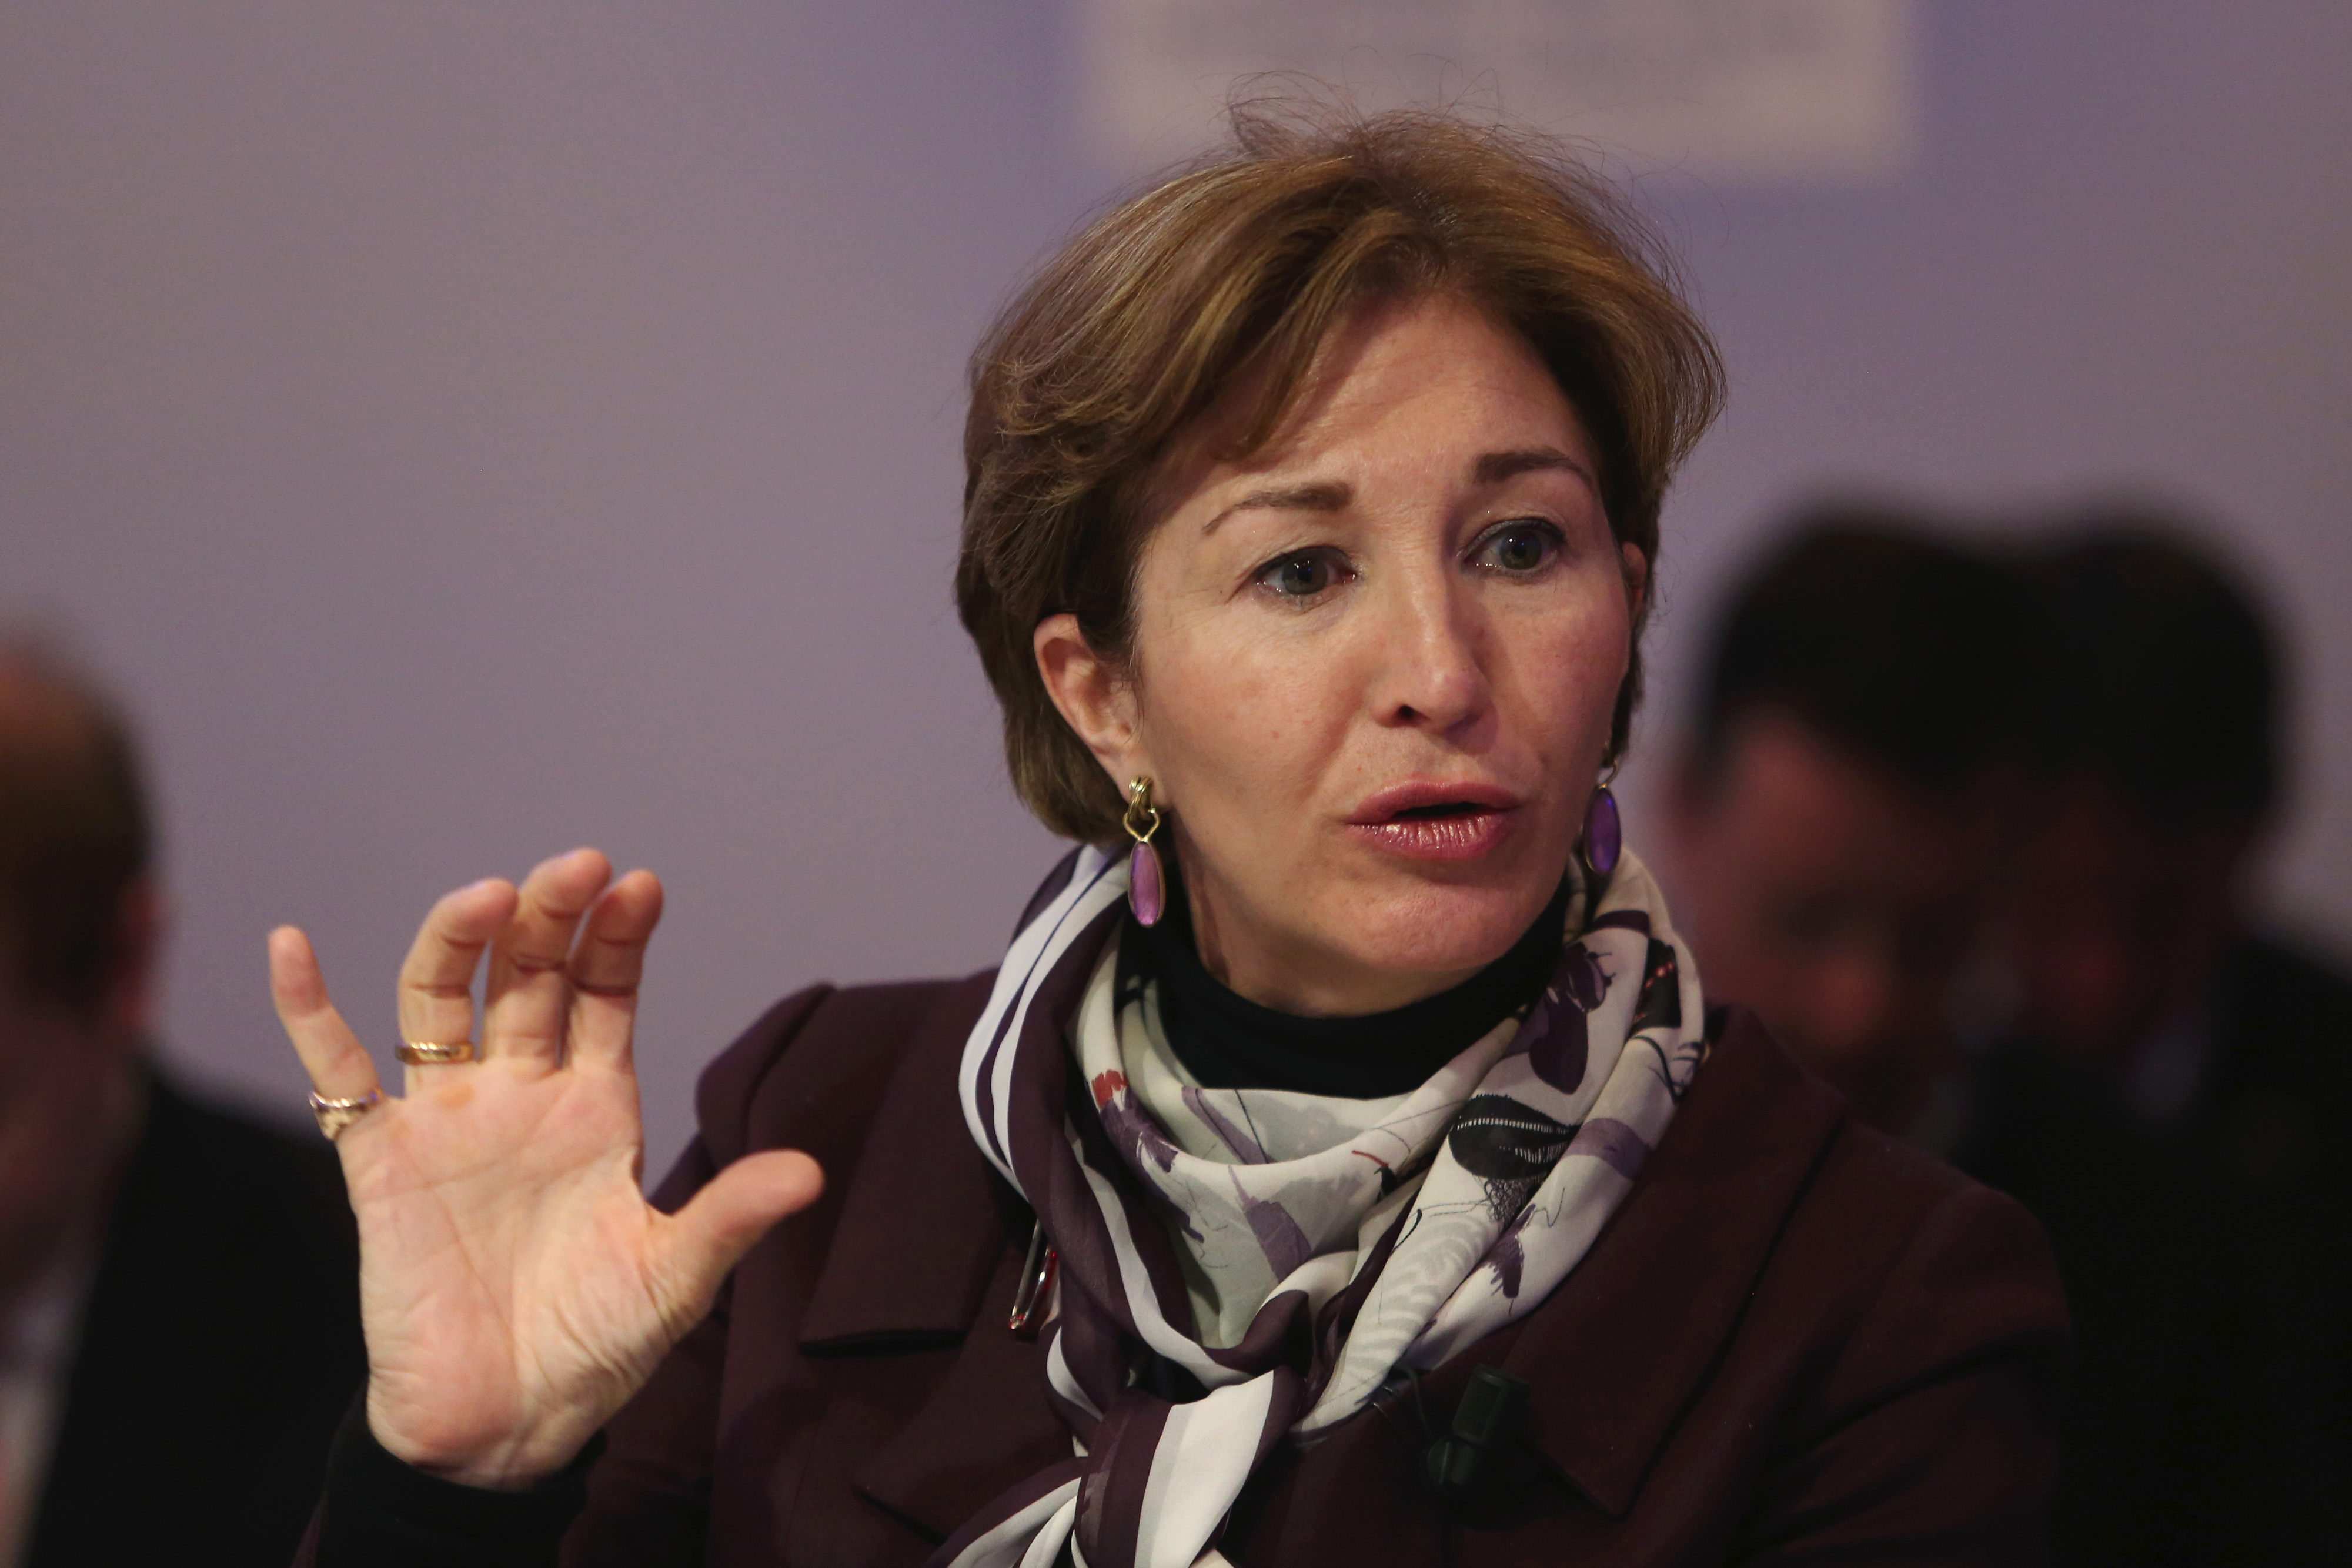 Anne-Marie Slaughter, president and chief executive officer of the New America Foundation, gestures as she speaks during a session on the opening day of the World Economic Forum (WEF) in Davos, Switzerland, on Wednesday, Jan. 21, 2015. (Chris Ratcliffe/Bloomberg--Getty Images (Bloomberg&mdash;Bloomberg via Getty Images)